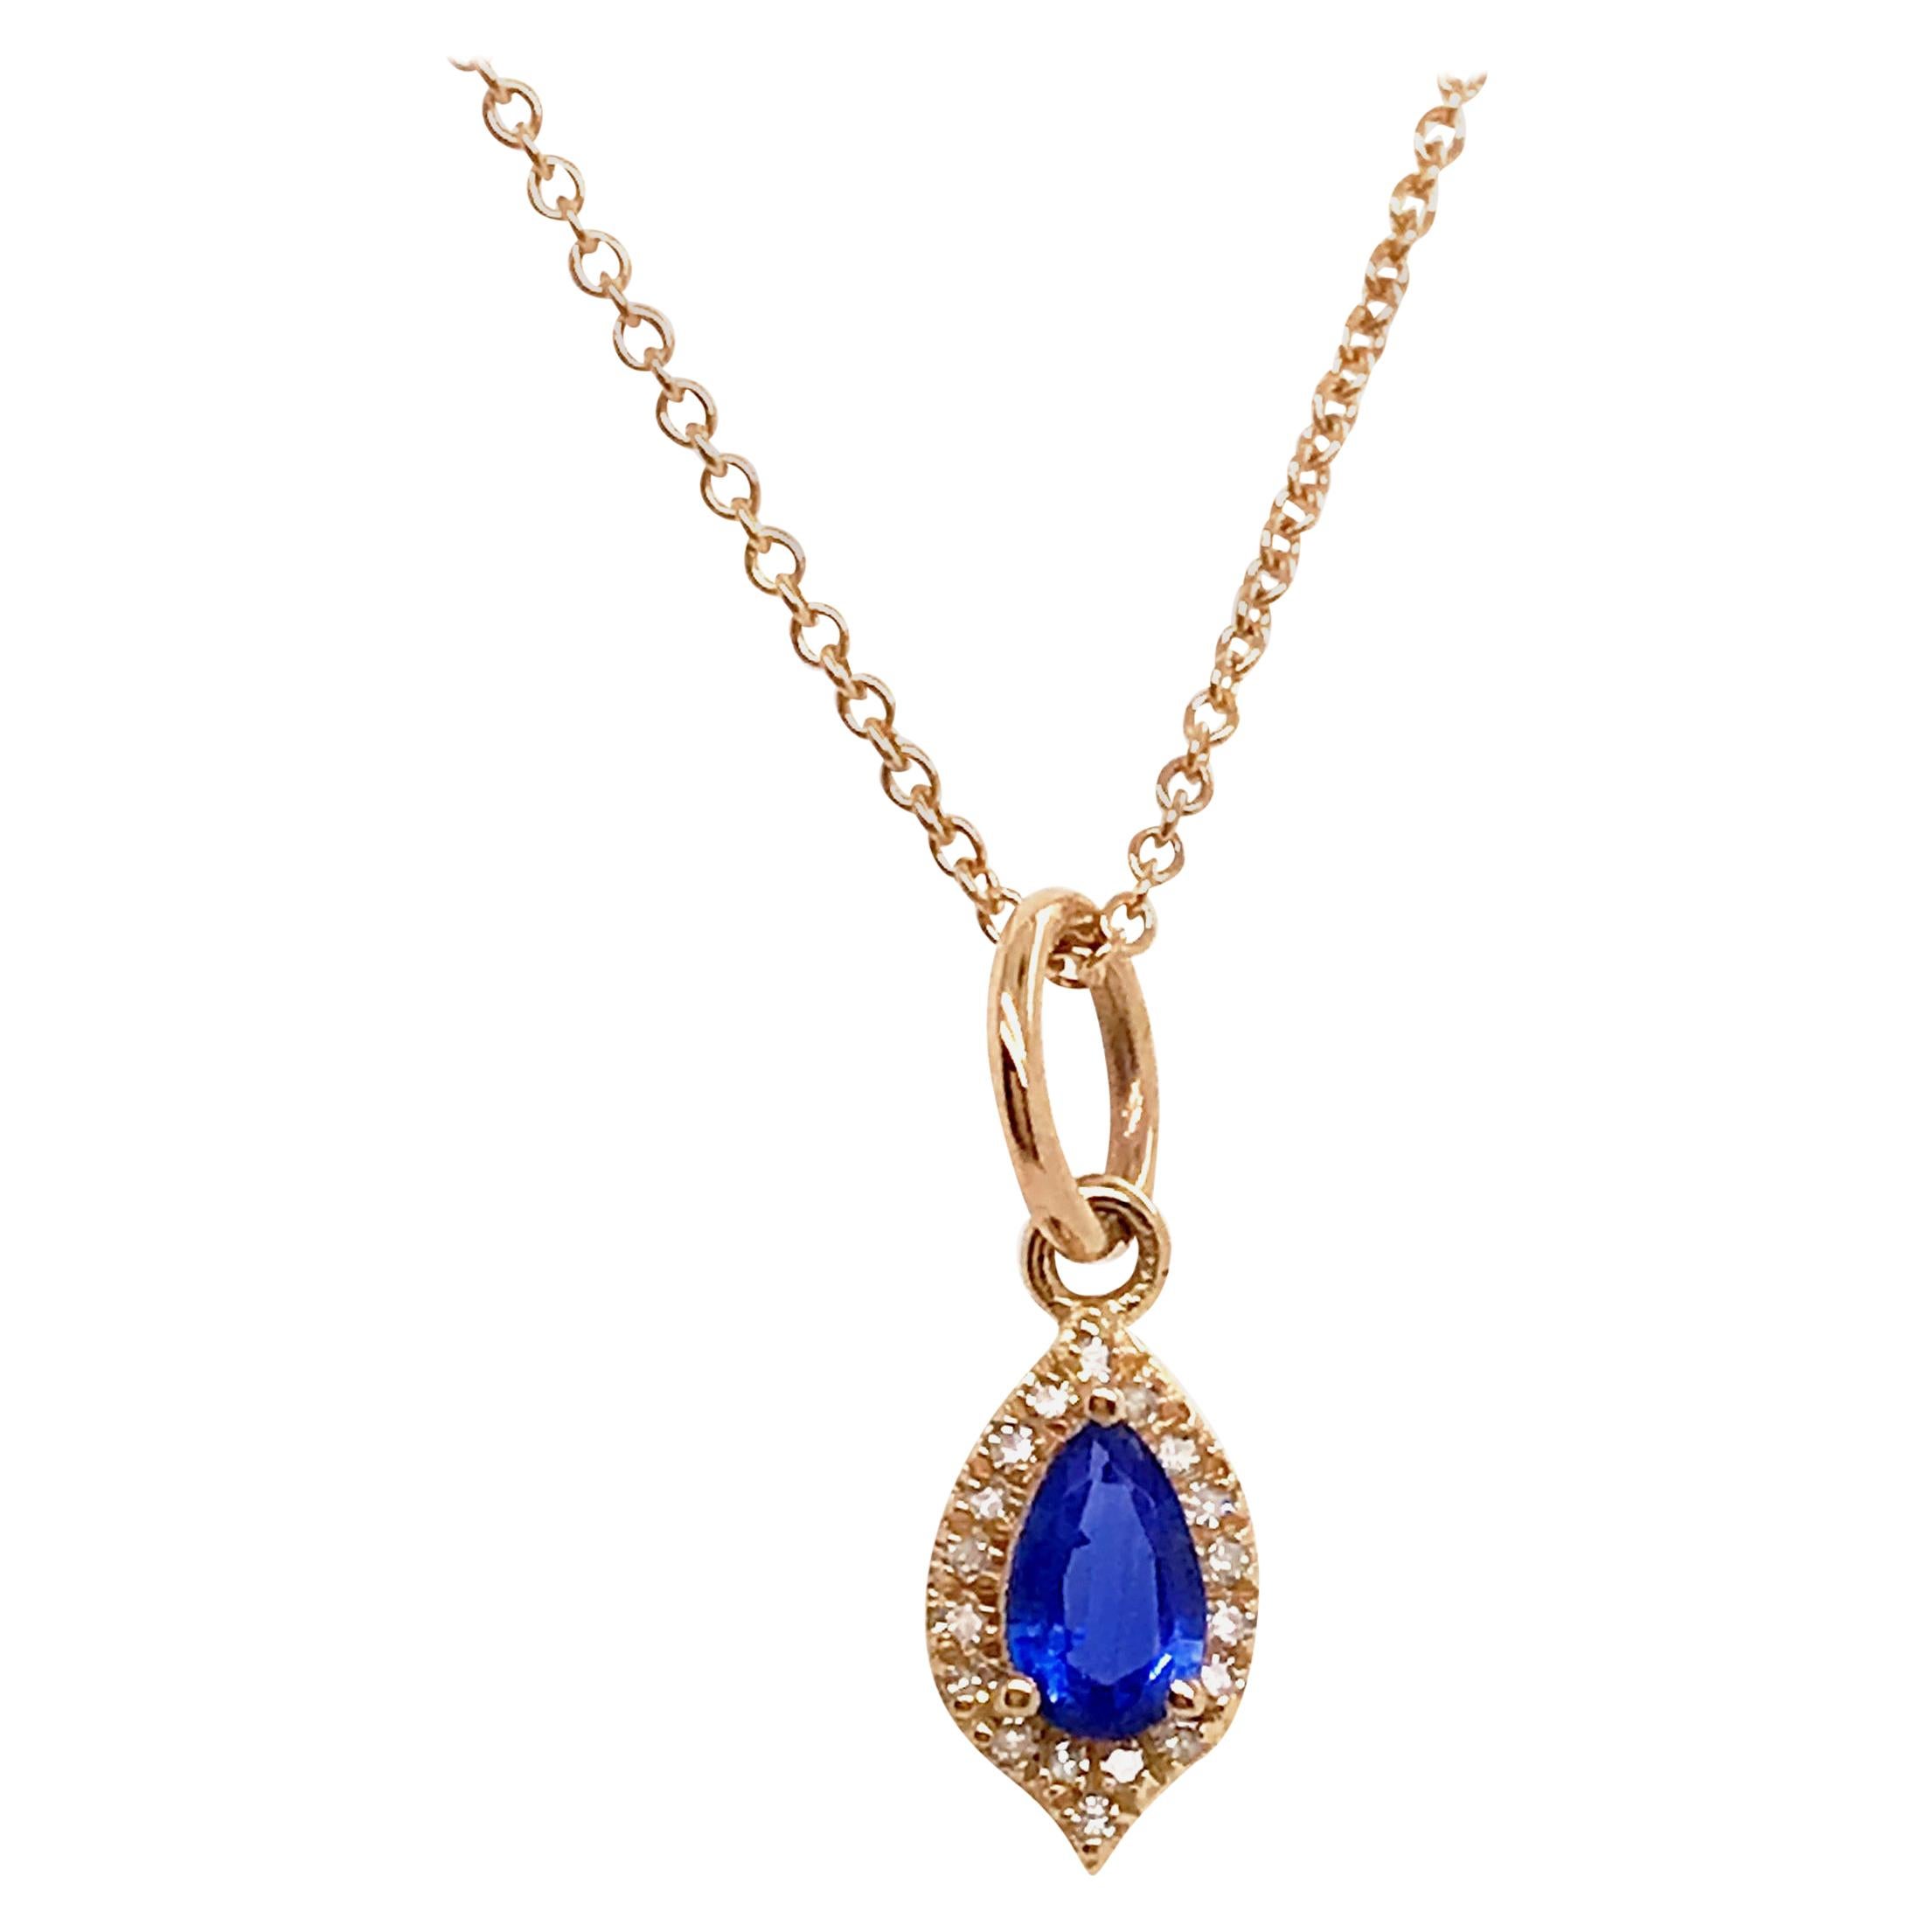 Blue Sapphire and Diamond Halo Pendant in 14 Karat Yellow Gold, Long Necklace